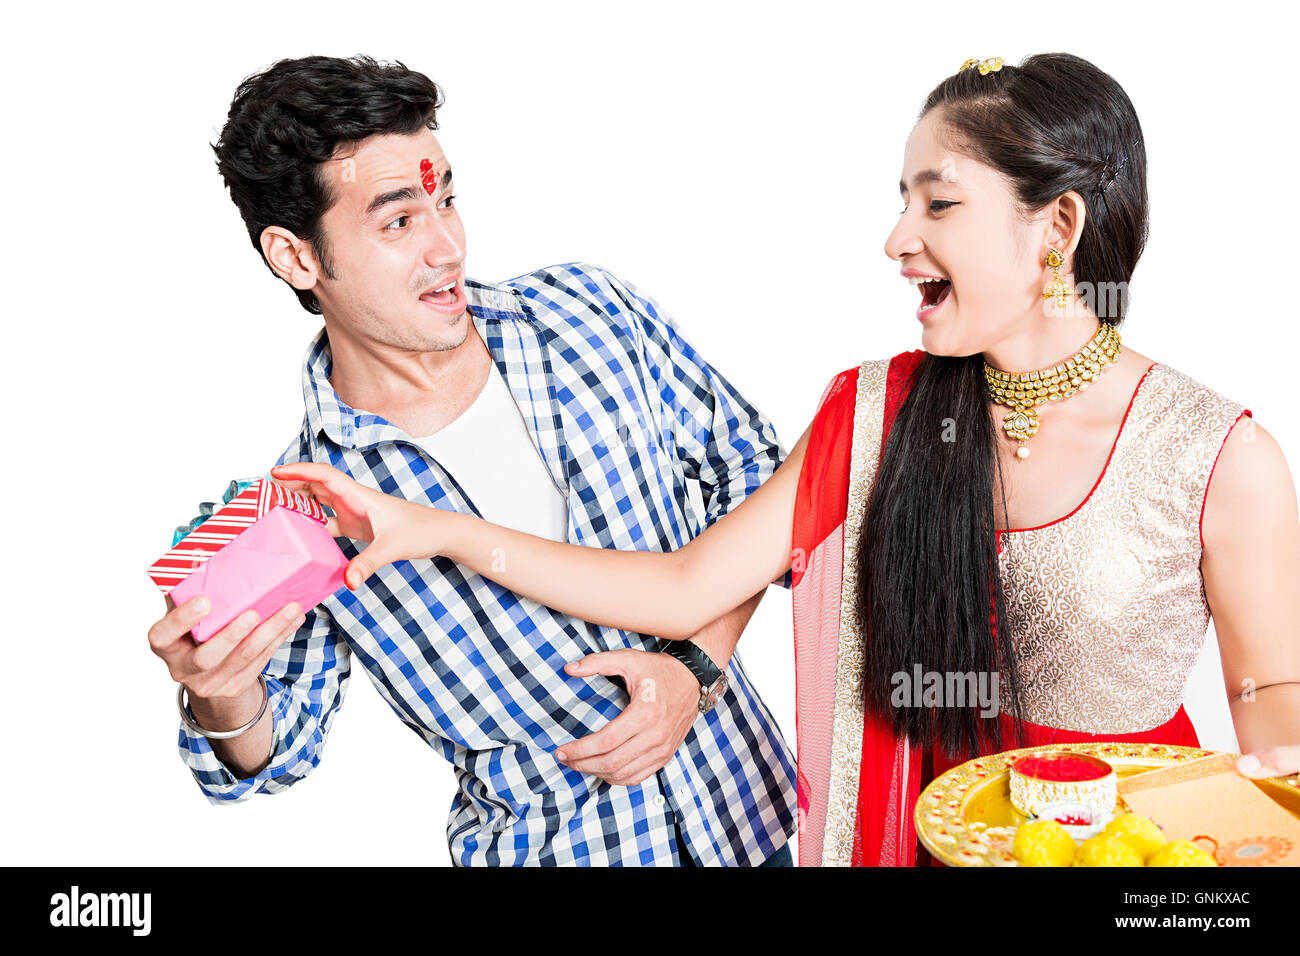 2 indian Teenagers Brother and Sister Raksha Bandhan Festivals Snatching gift Stock Photo